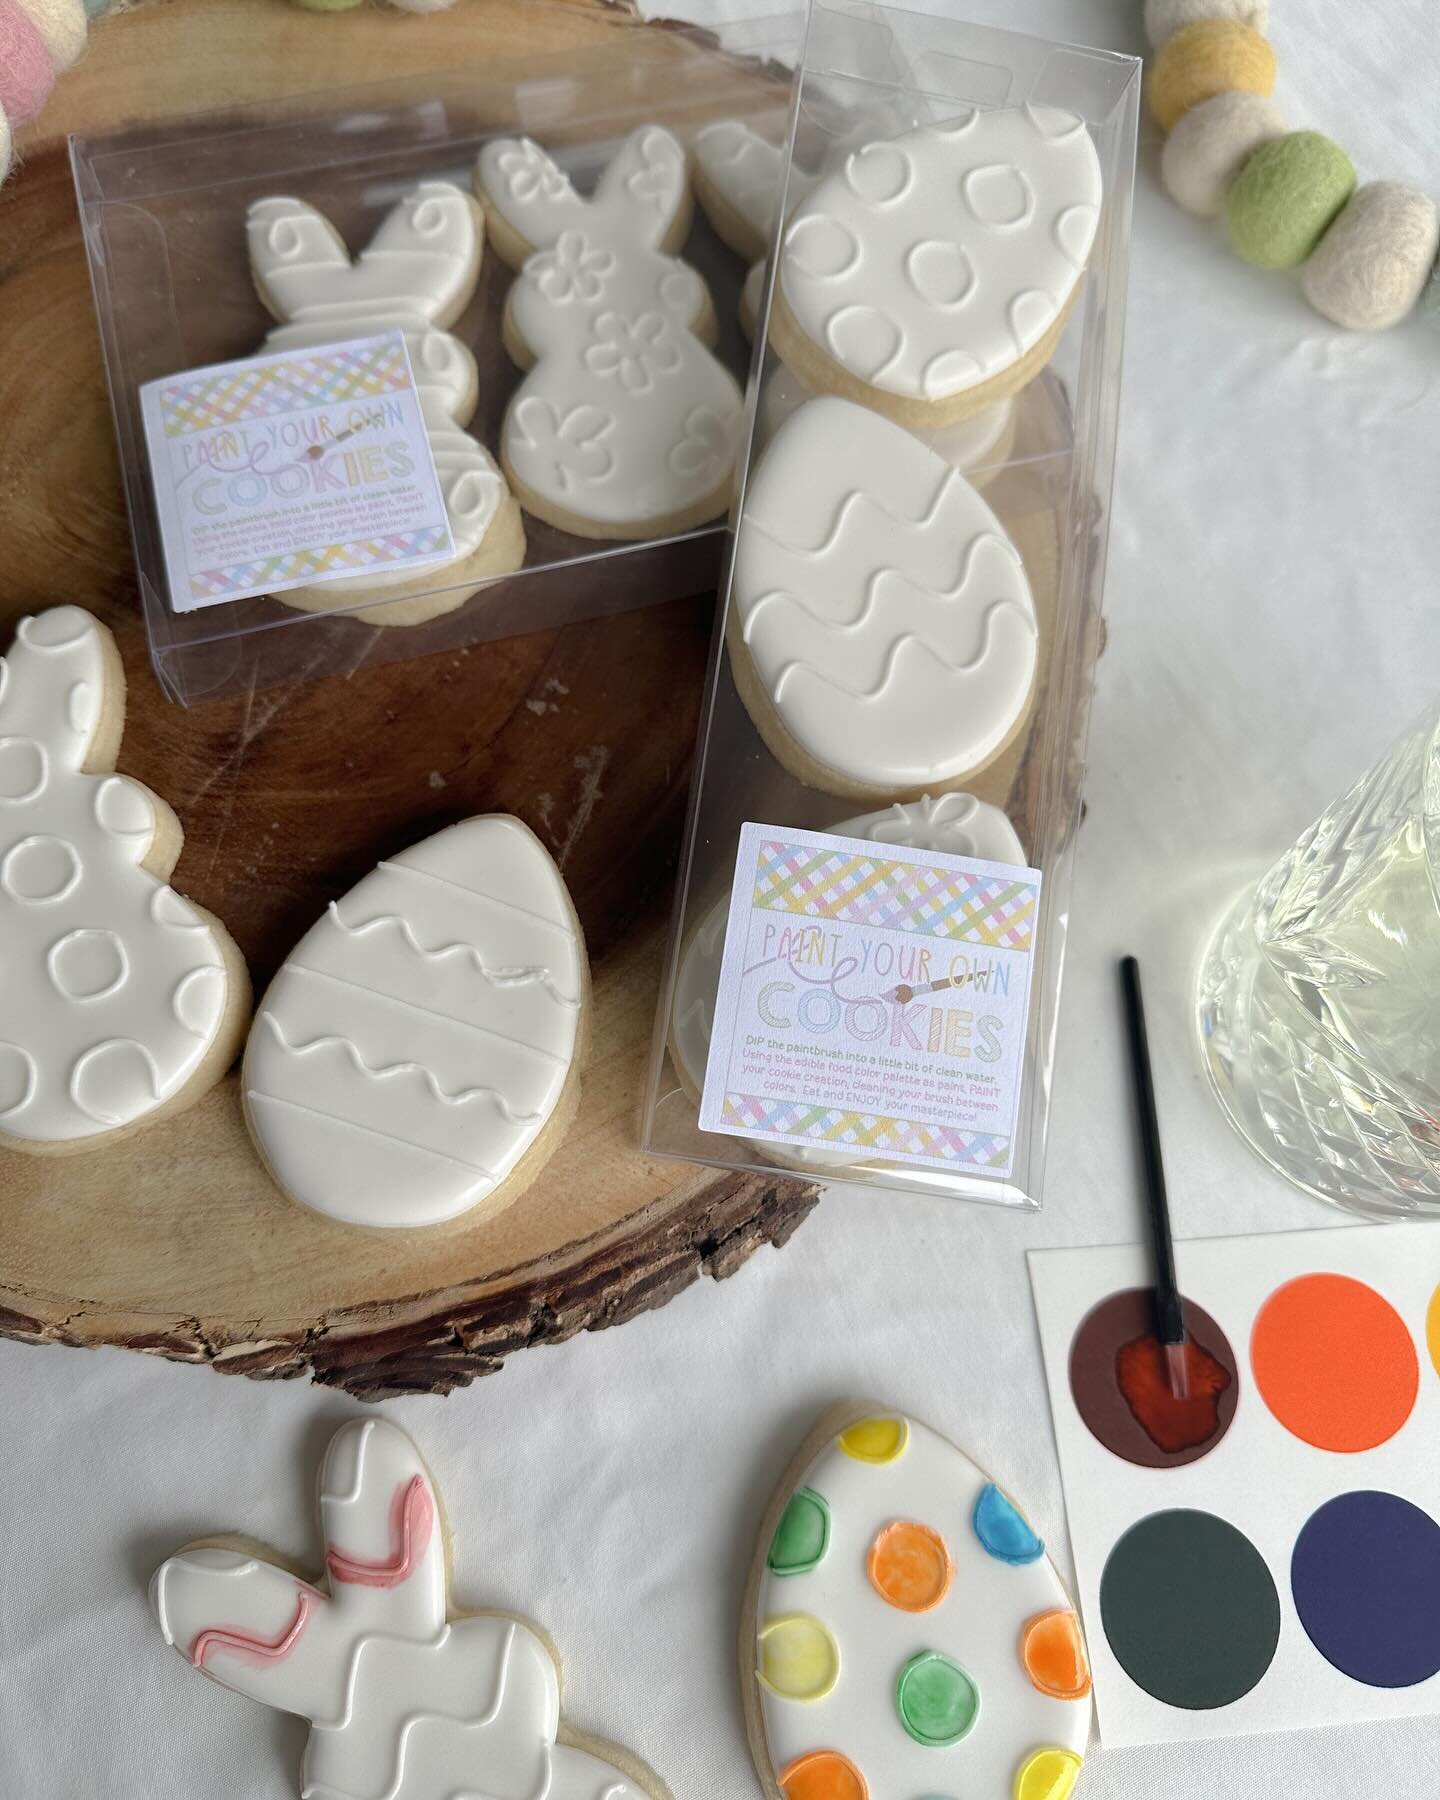 Attention all of my Houston and Navasota Peeps: SomeBUNNY told me that Bessie&rsquo;s Easter cookies are live! Shop the link in my profile! 

V excited about this year&rsquo;s options, especially the paint-your-own option! 

Pick up will be Friday, M